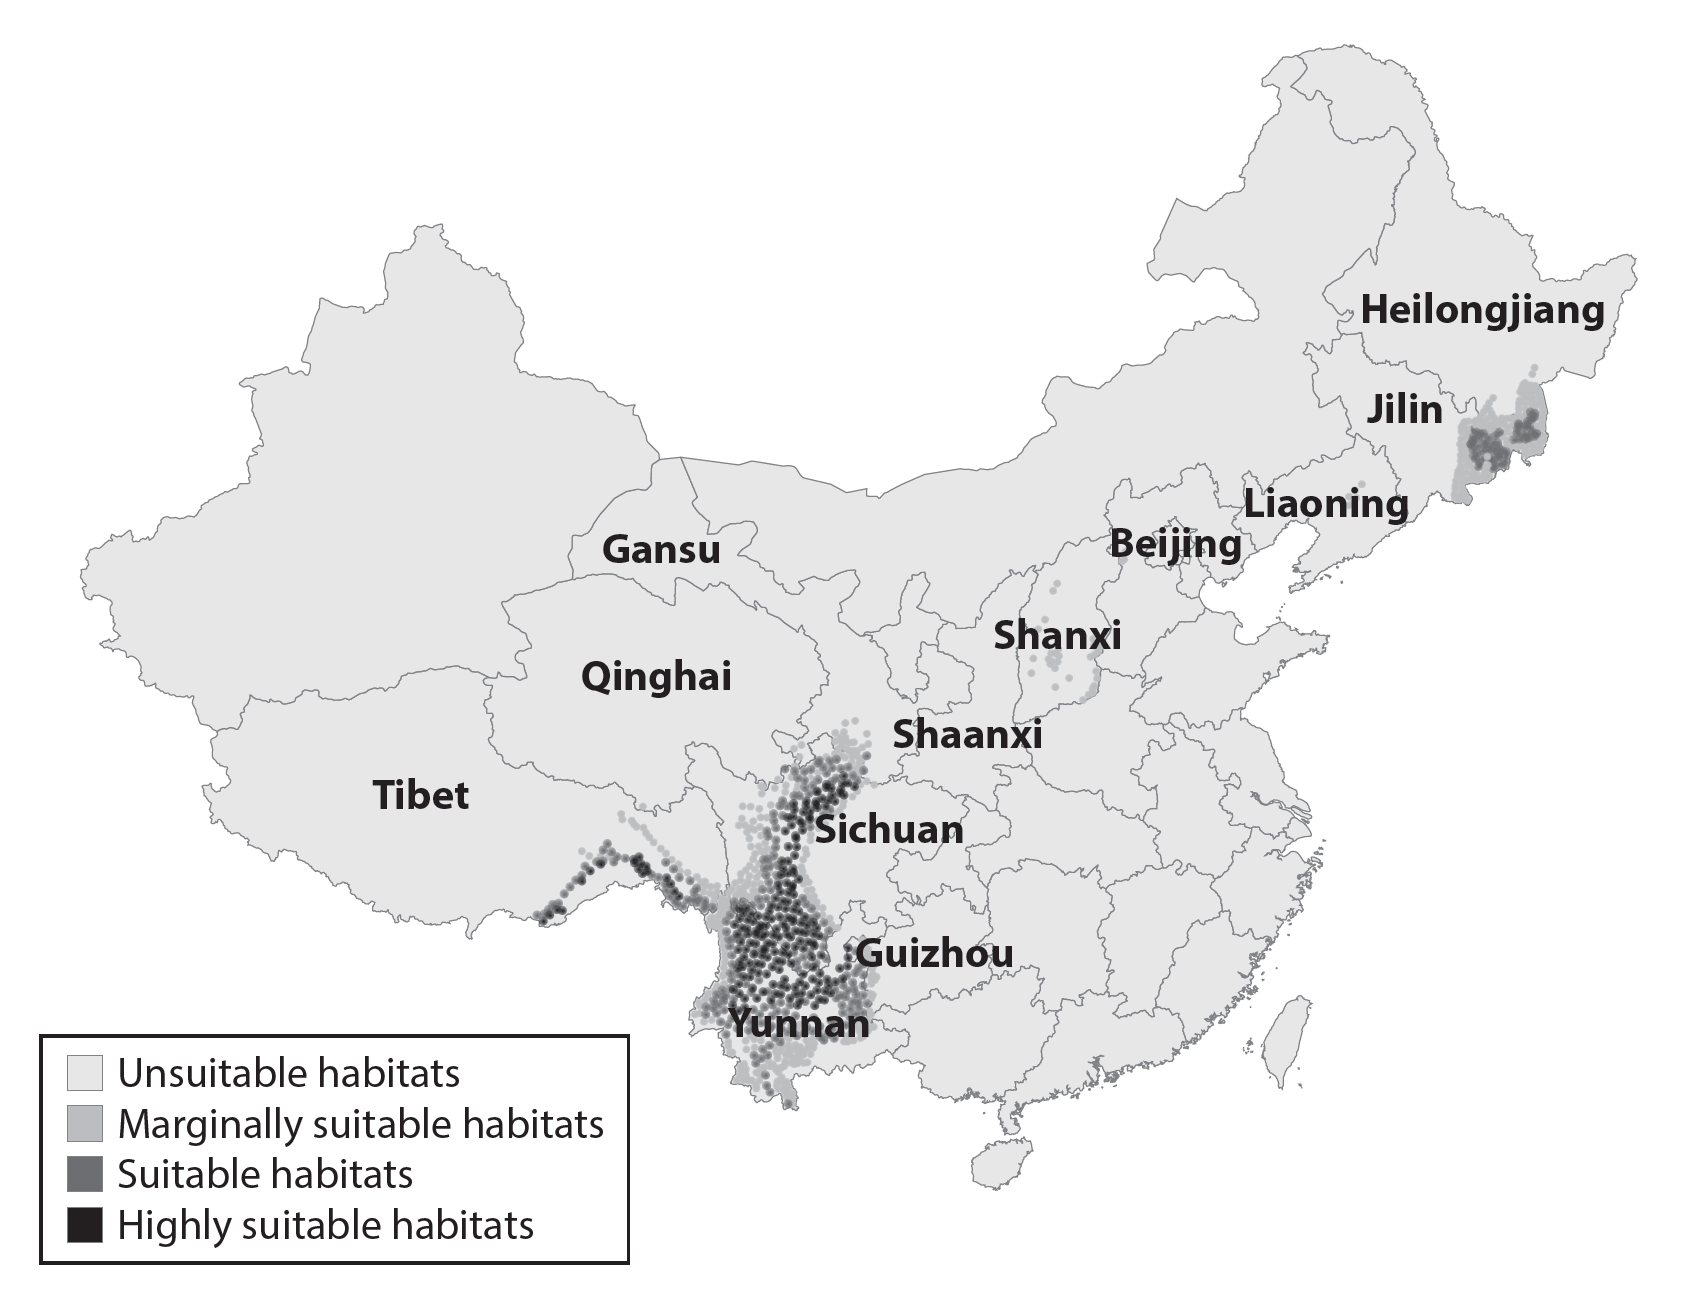 Map of matsutake habitats in China. From What a Mushroom Lives For by Michael J. Hathaway. Princeton University Press, 2022.